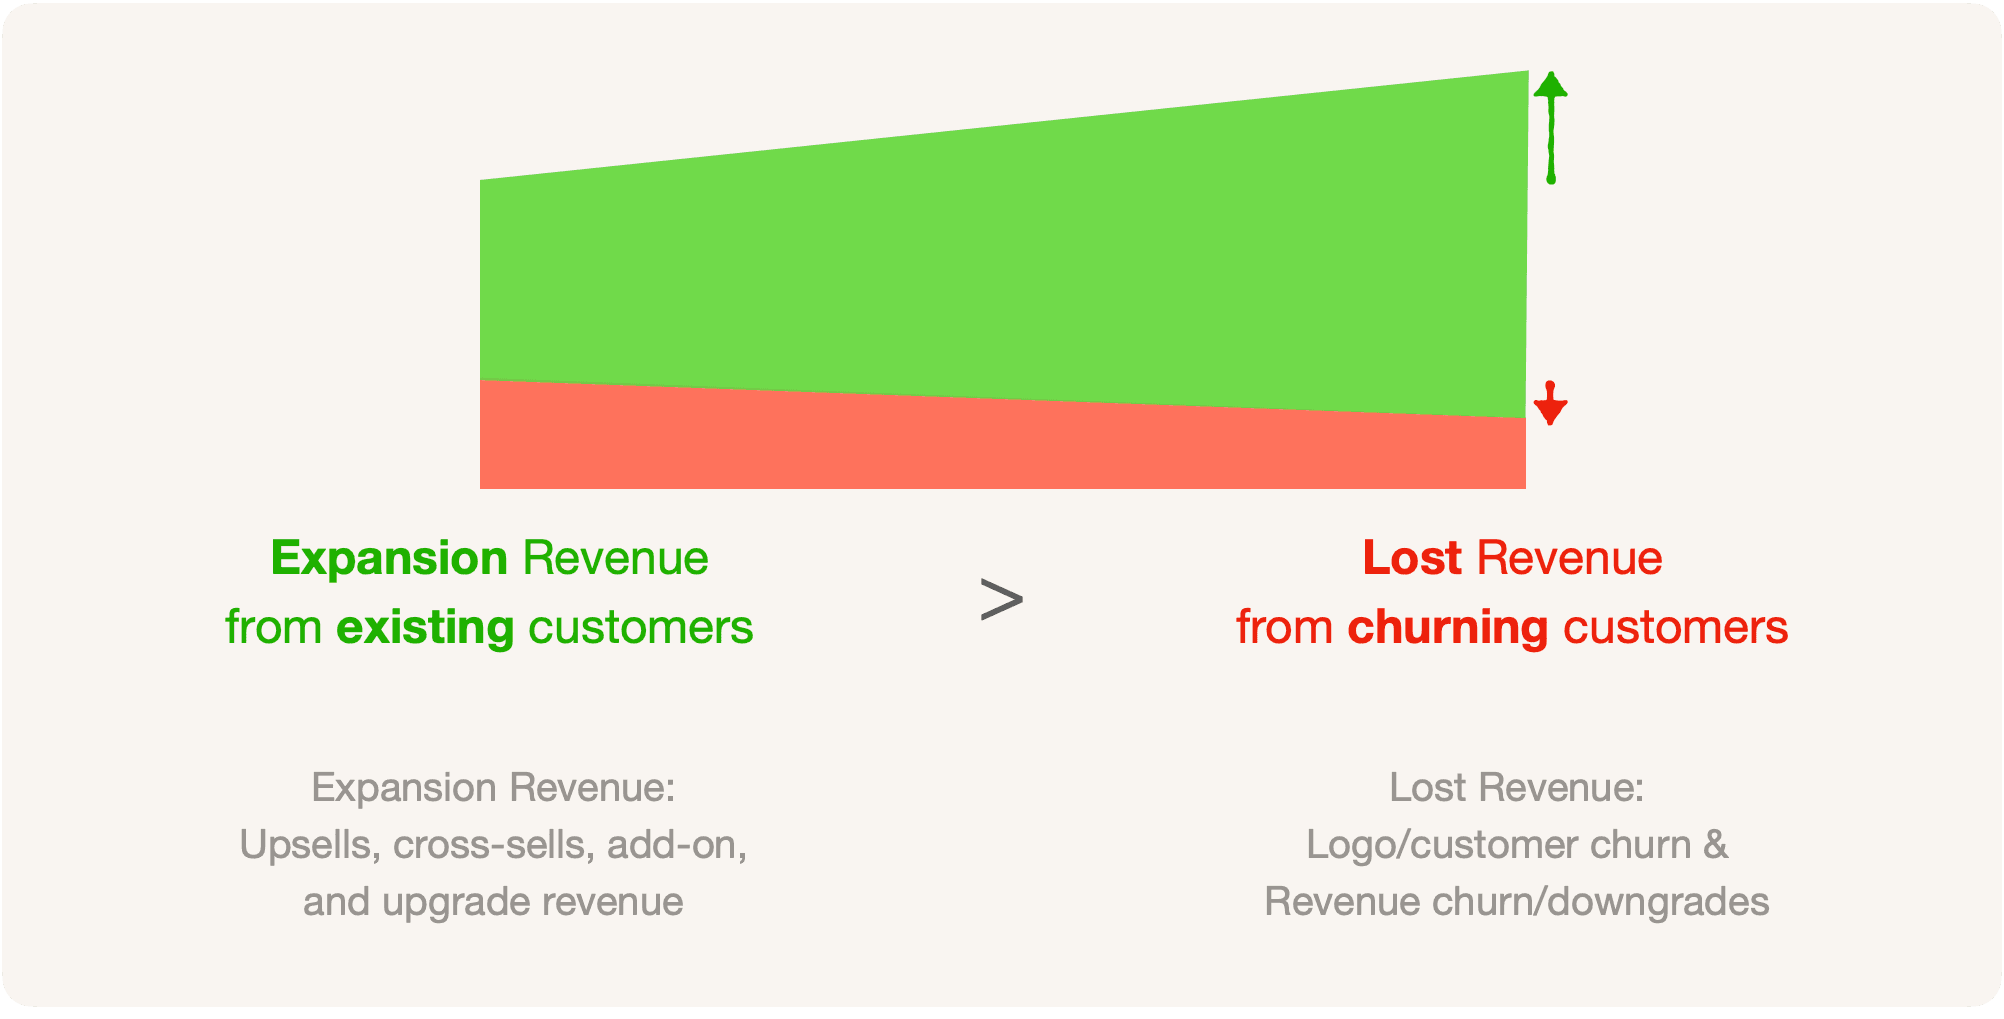 Net Negative Churn: Total expansion revenue from existing customers is greater than lost revenue from churning customers.